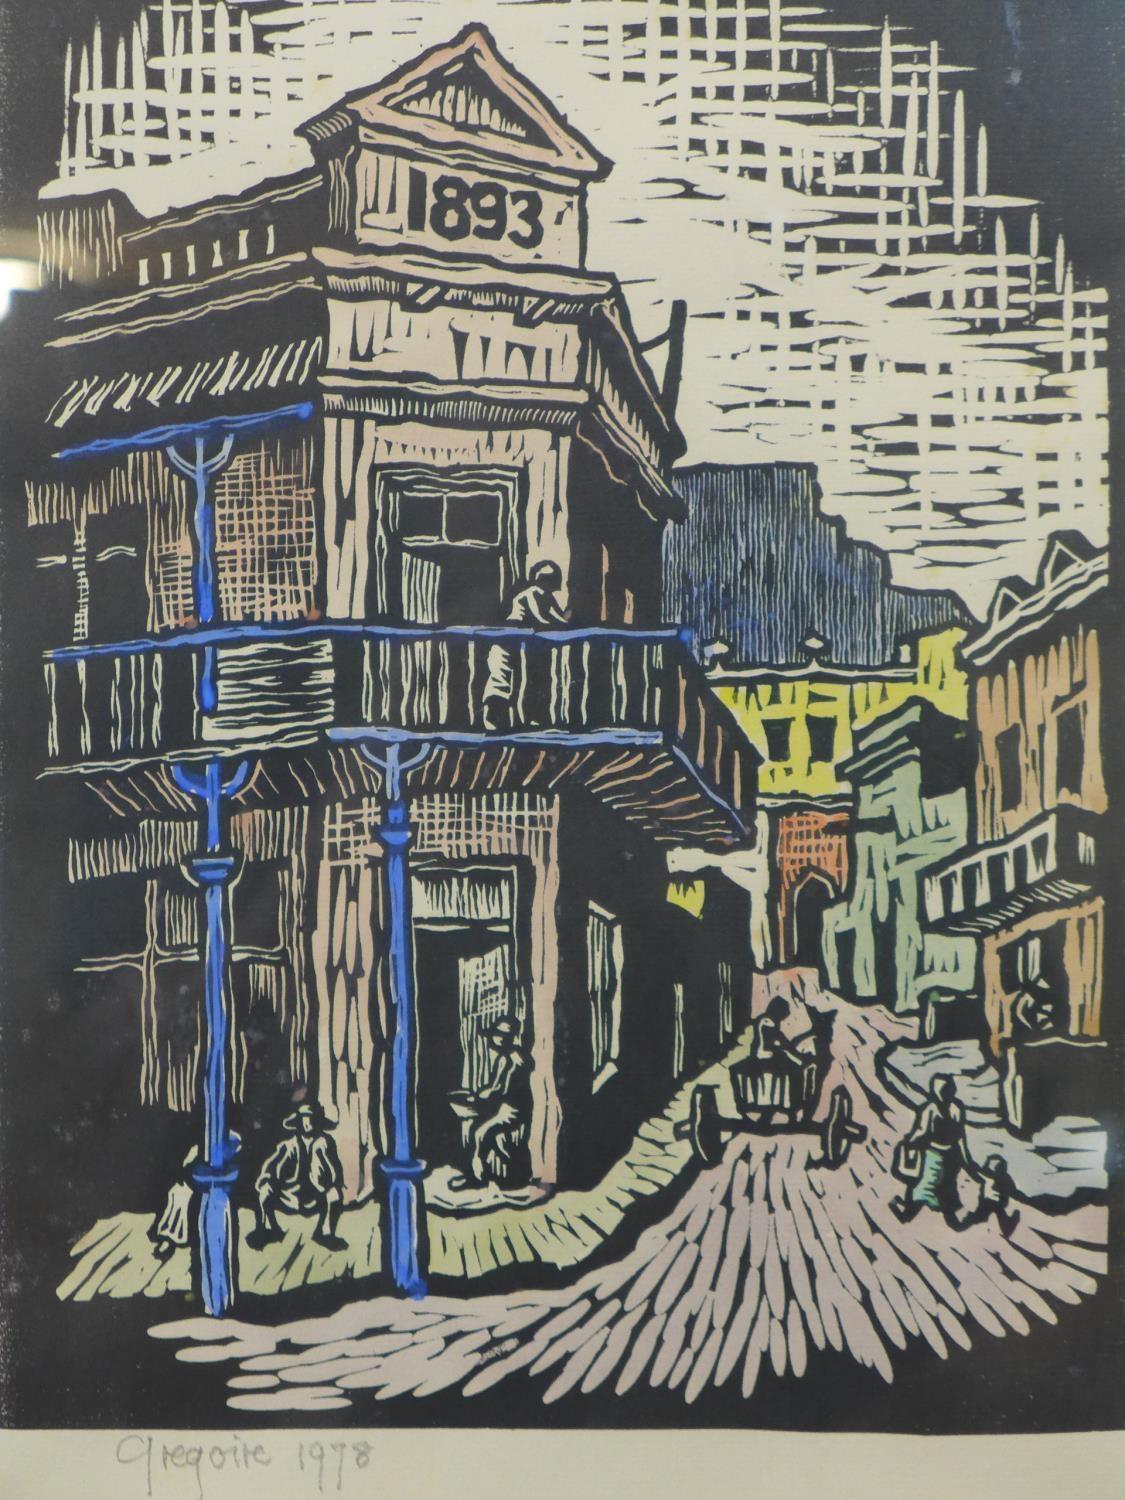 Gregoire Boonzaier (South African, 1909-2005), Street scene, hand-coloured woodcut print, signed and